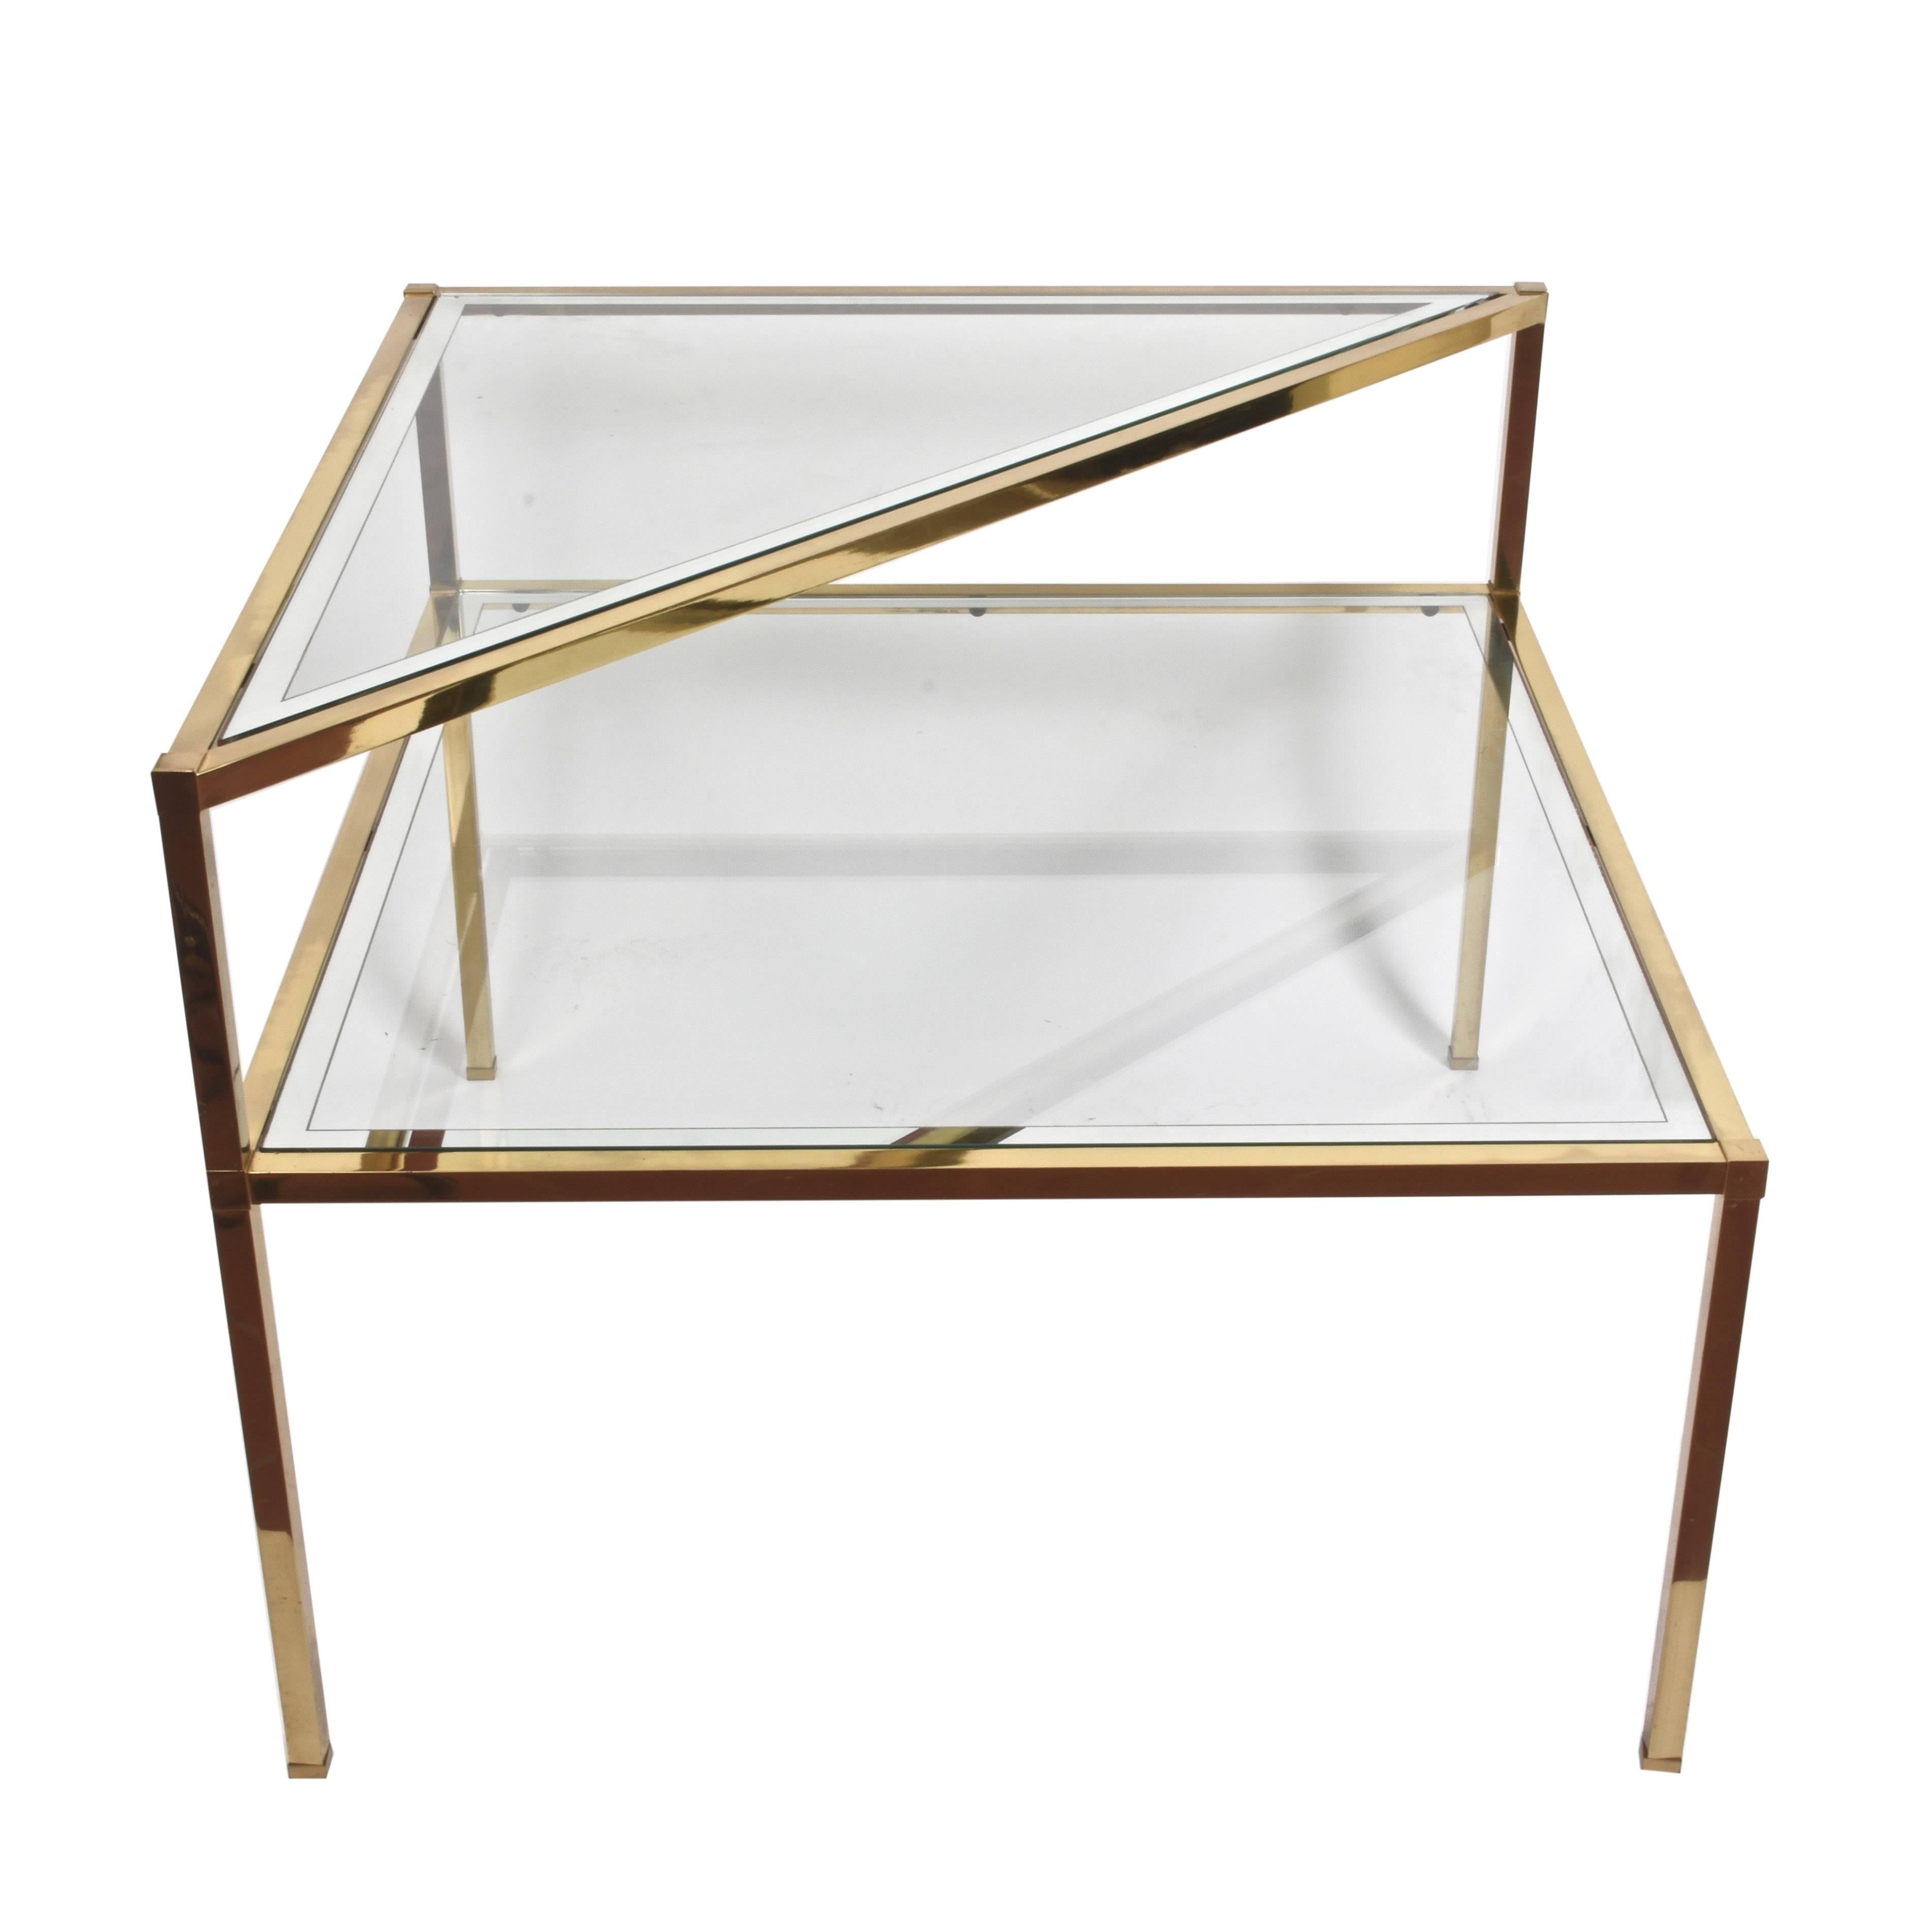 Midcentury pair of two brass cocktail tables with double shelf. This wonderful set was produced in Italy during the 1970s.

The lines and the design of this set of tables are simply unique, the bottom shelf being squared and the top one being